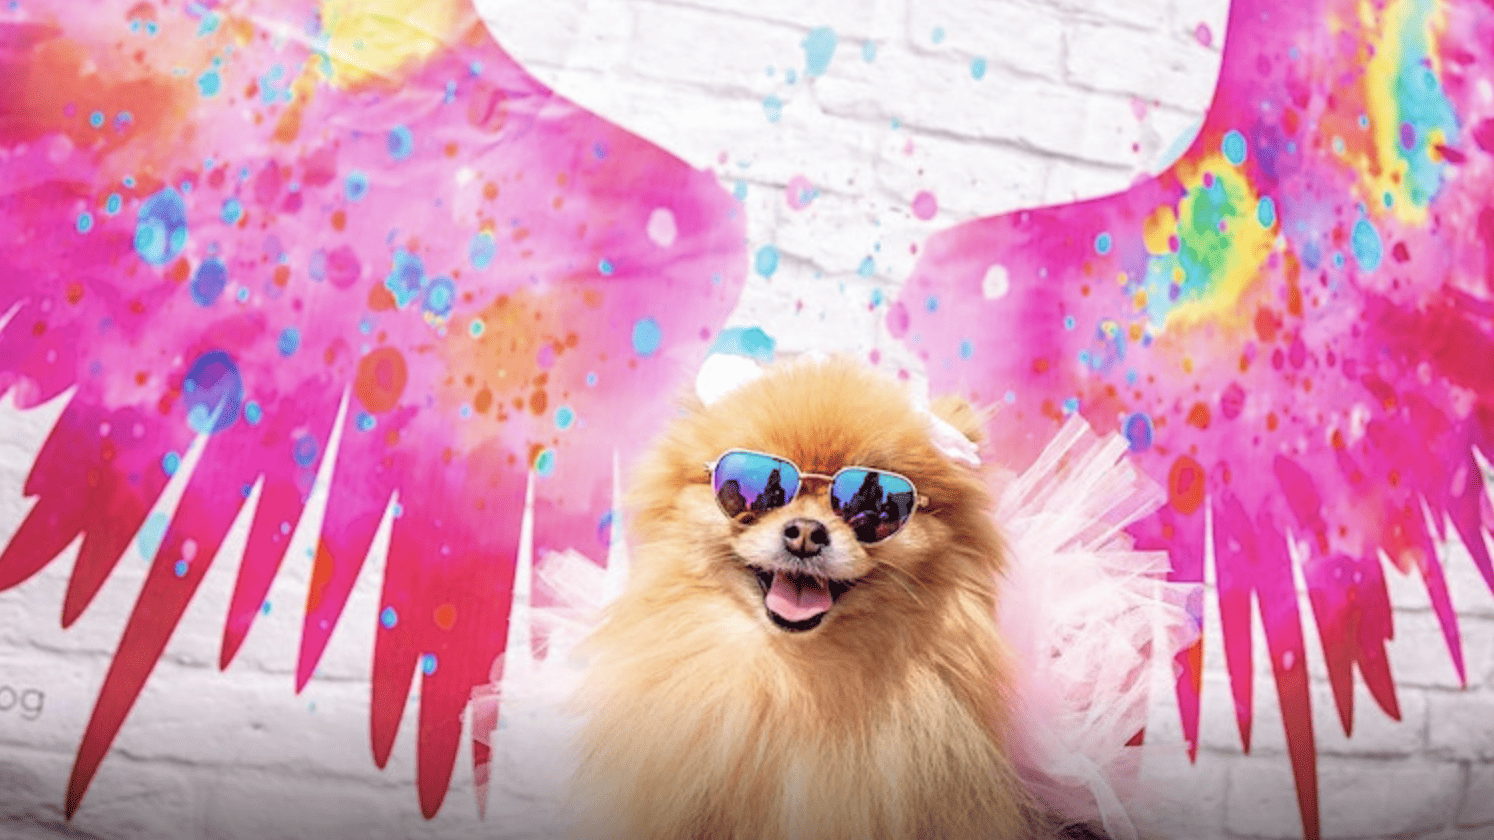 a small dog wearing sunglasses in front of a mural with wings painted on it.